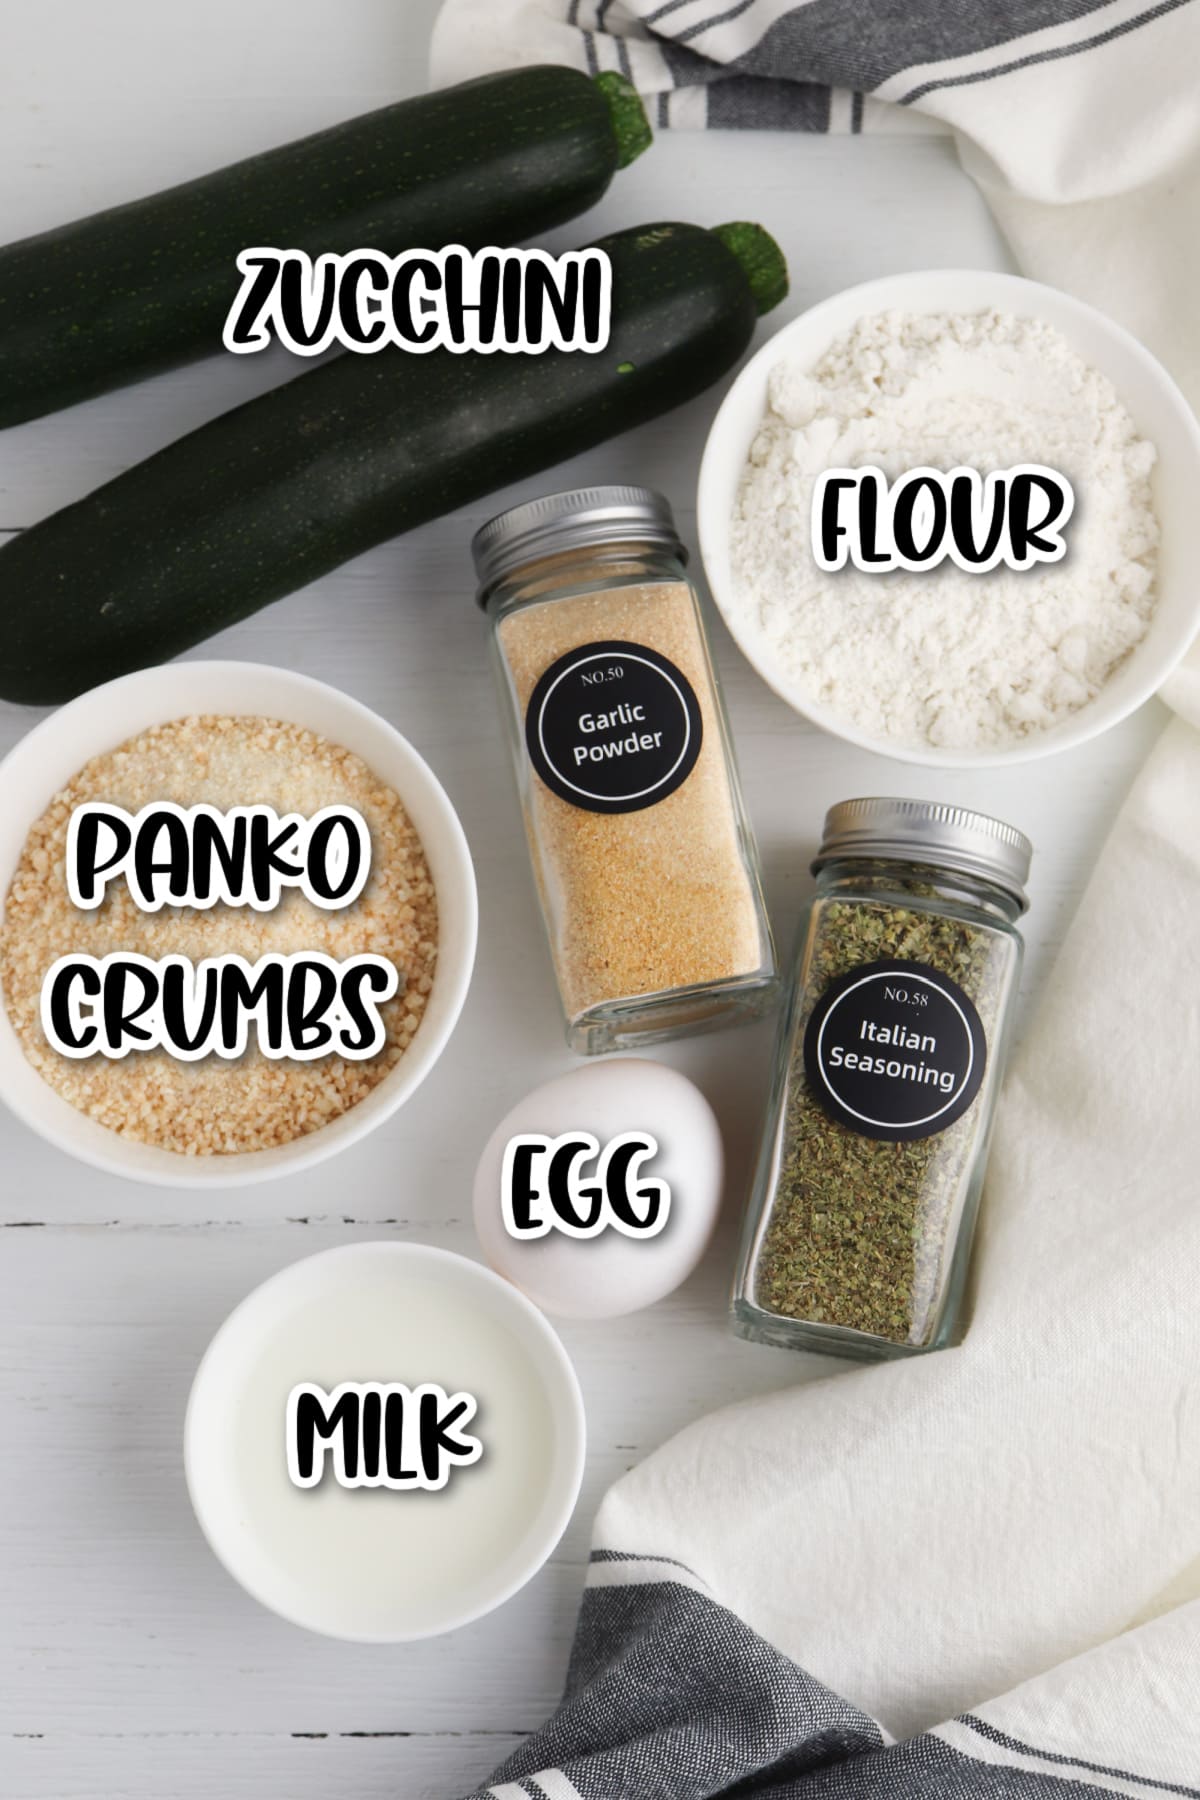 Ingredients for baked zucchini fries